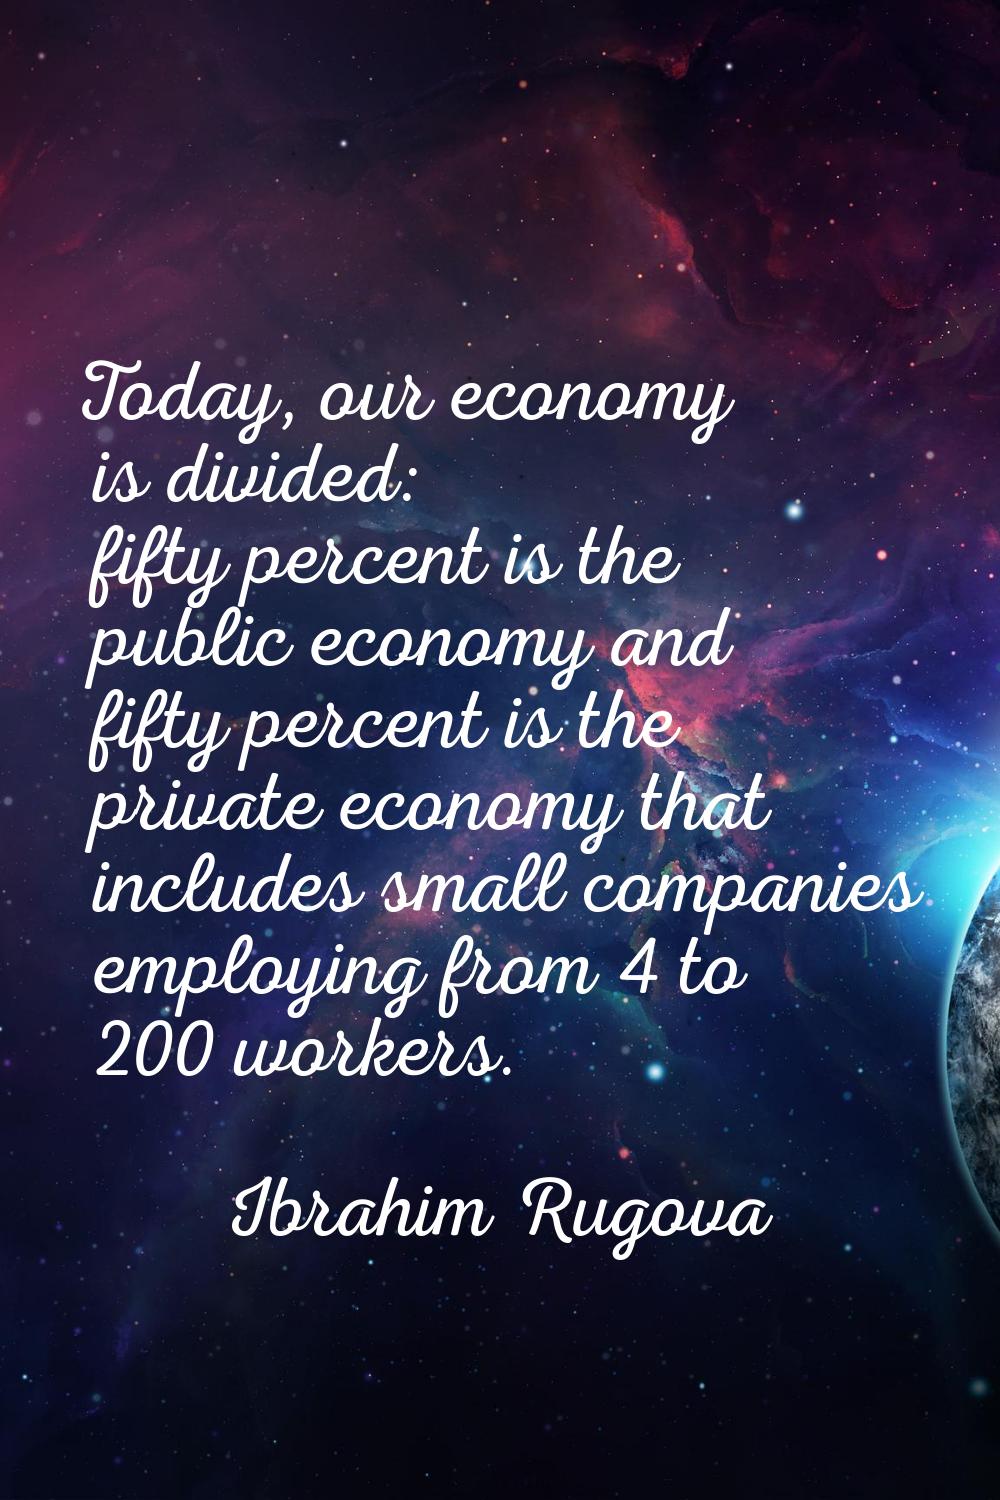 Today, our economy is divided: fifty percent is the public economy and fifty percent is the private